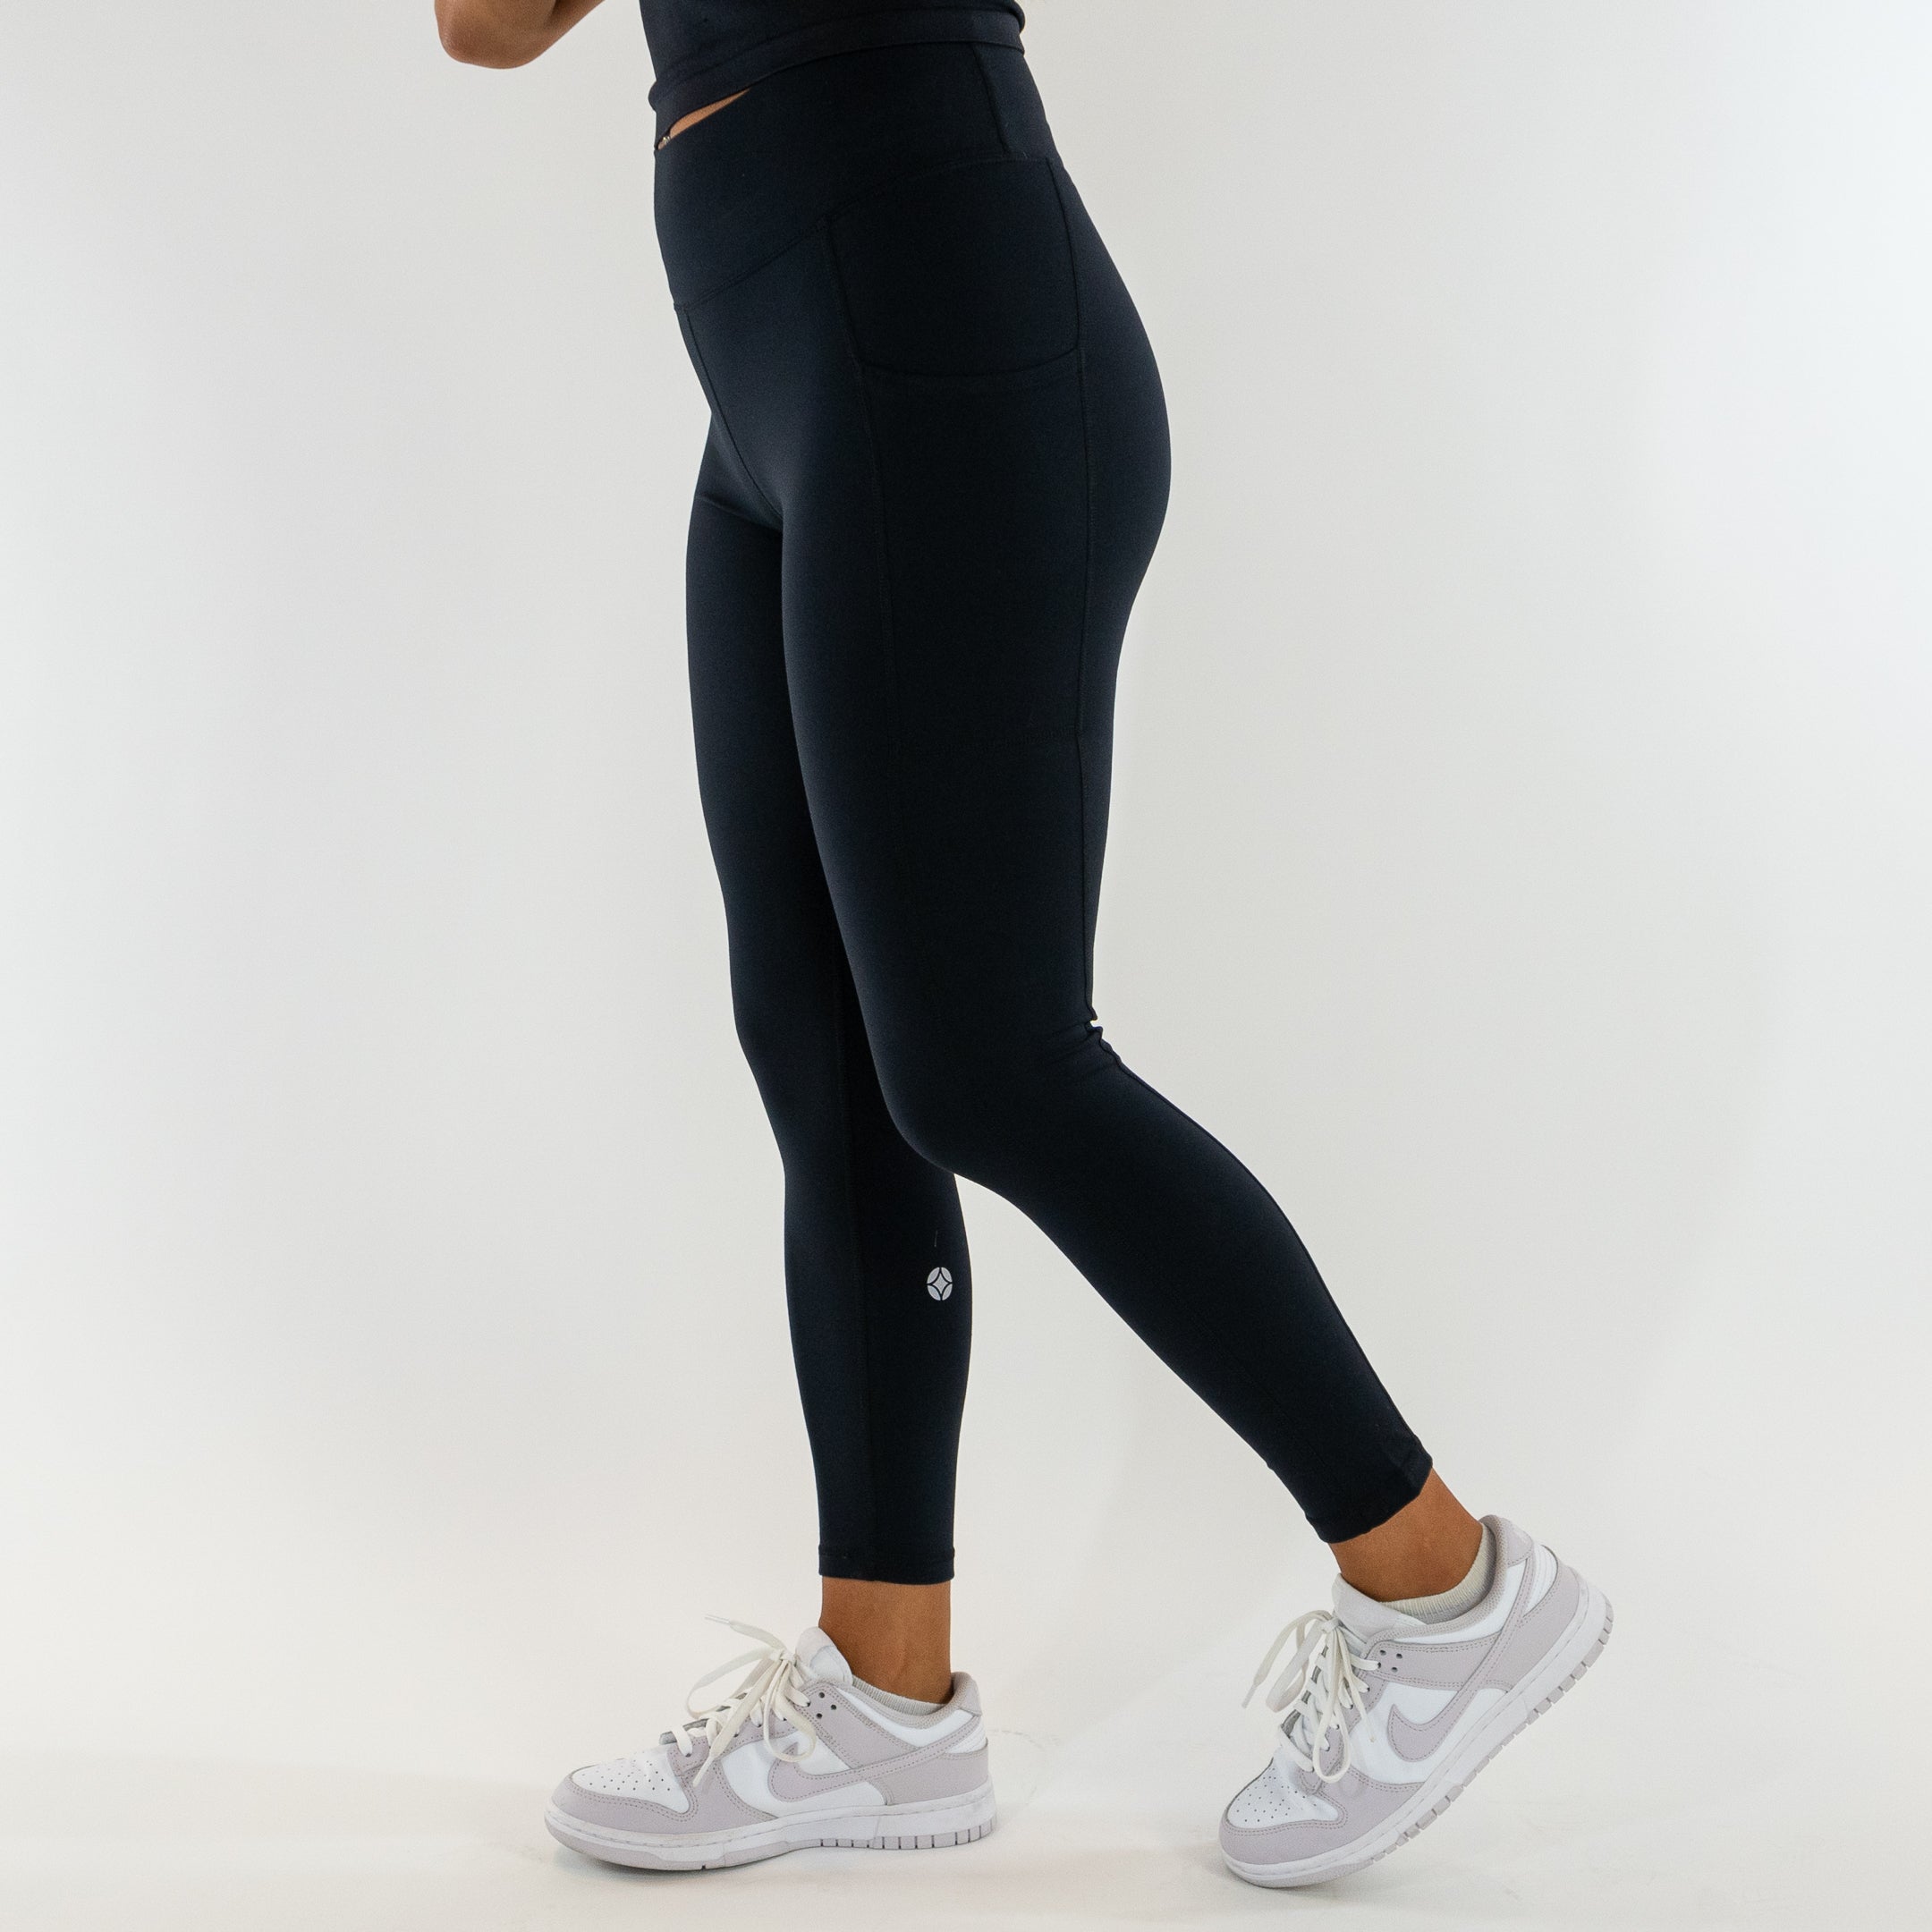 Buy Black Leggings With Cut Out Knees / Yoga Pants / Gym Pants / Black Lycra  / One Size / Stretch Leggings. Online in India - Etsy